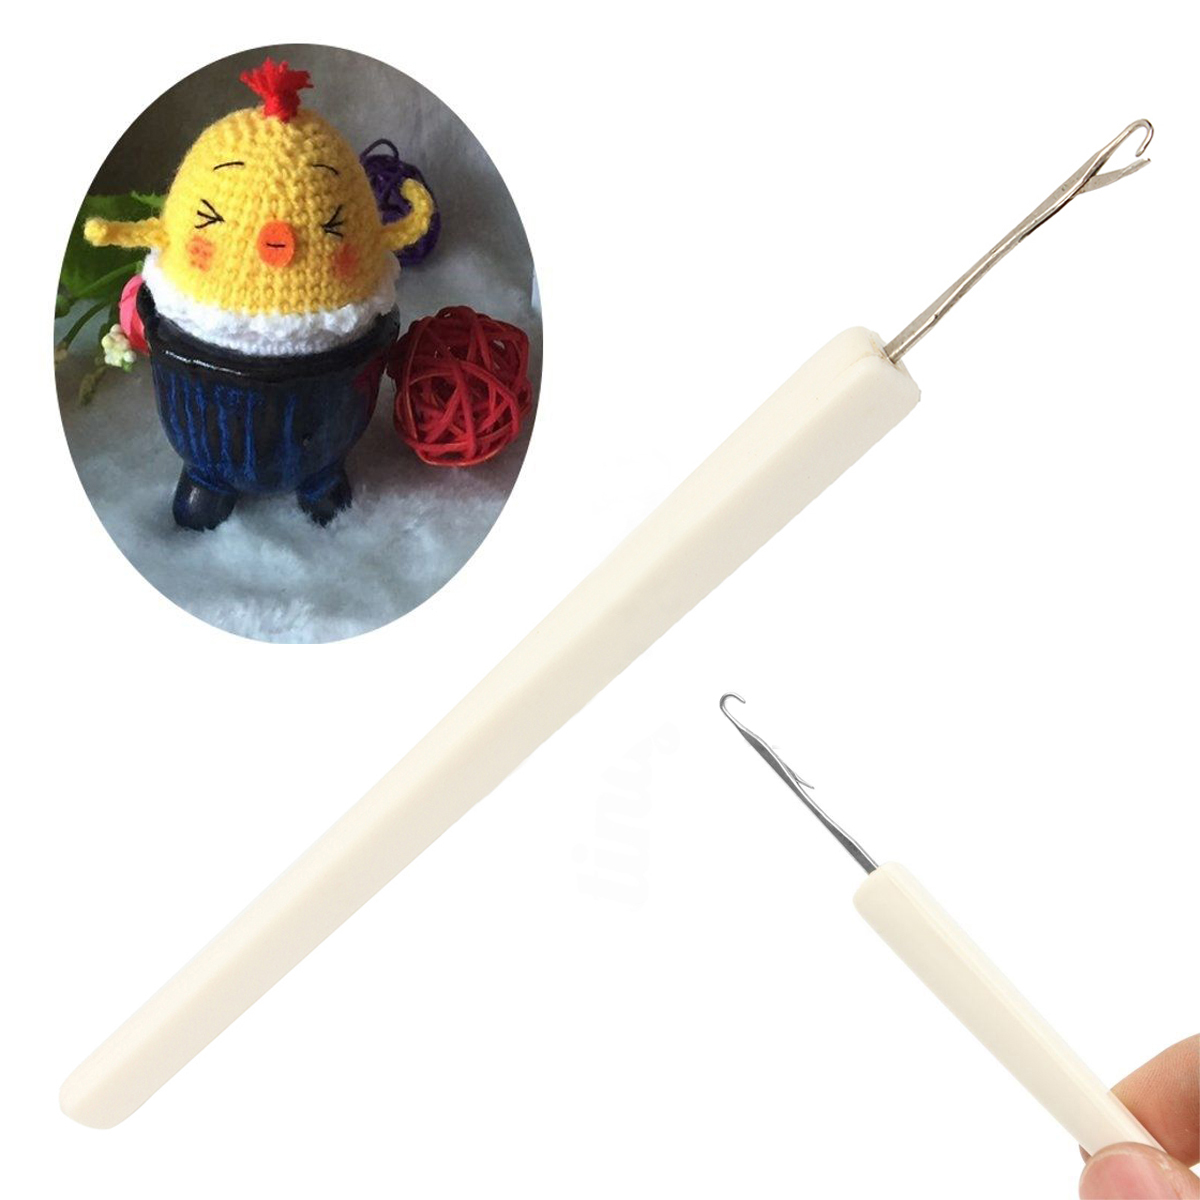 1pc Knitting Latch Tool Crochet Hook 5.5" Mayitr For 4.5mm Gauge Brother Knitting Machine Parts